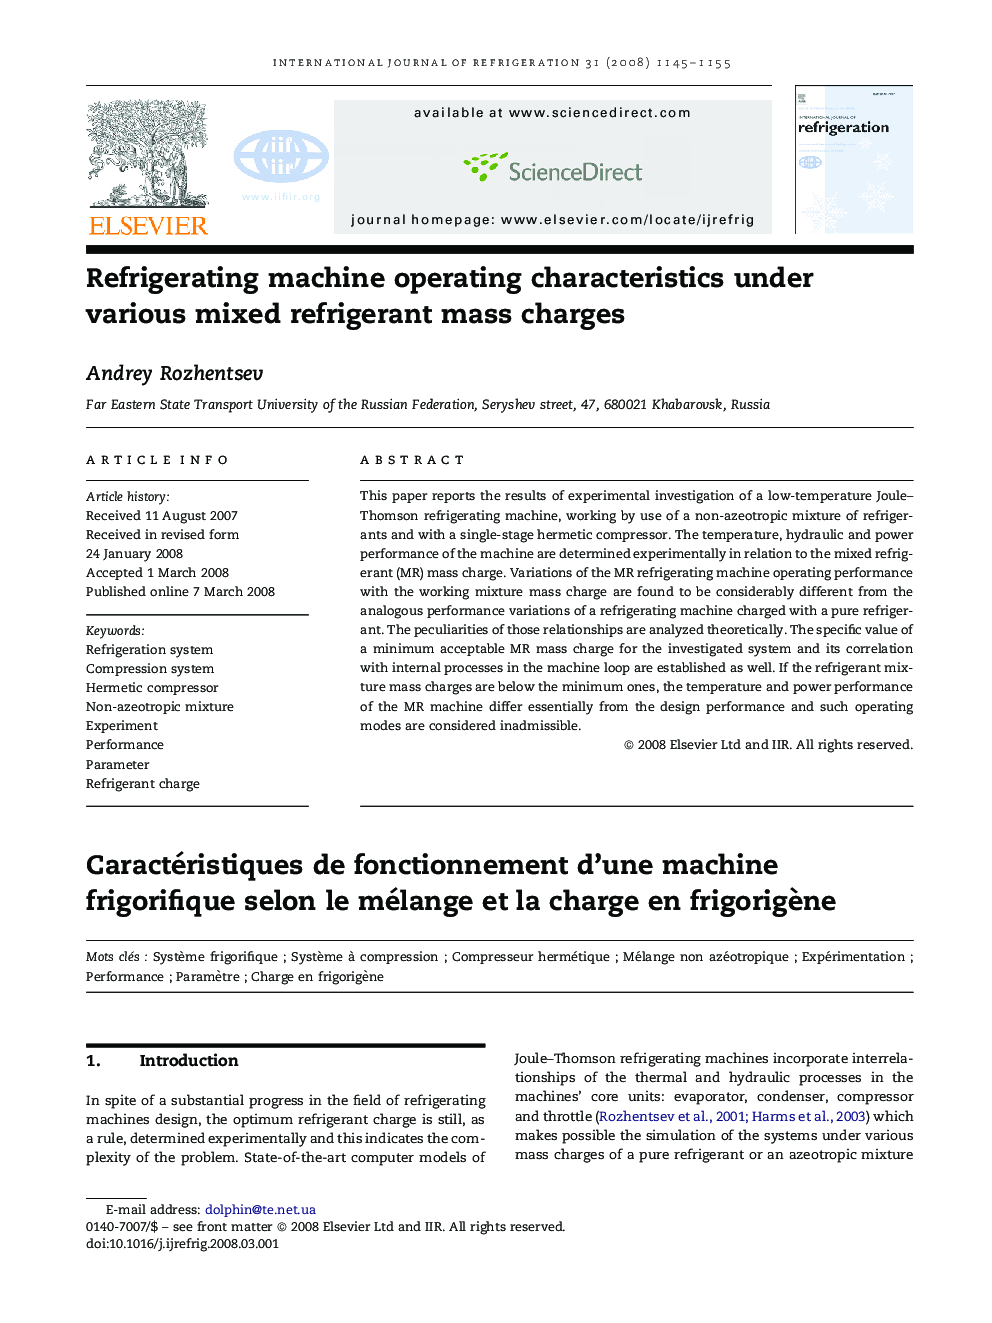 Refrigerating machine operating characteristics under various mixed refrigerant mass charges